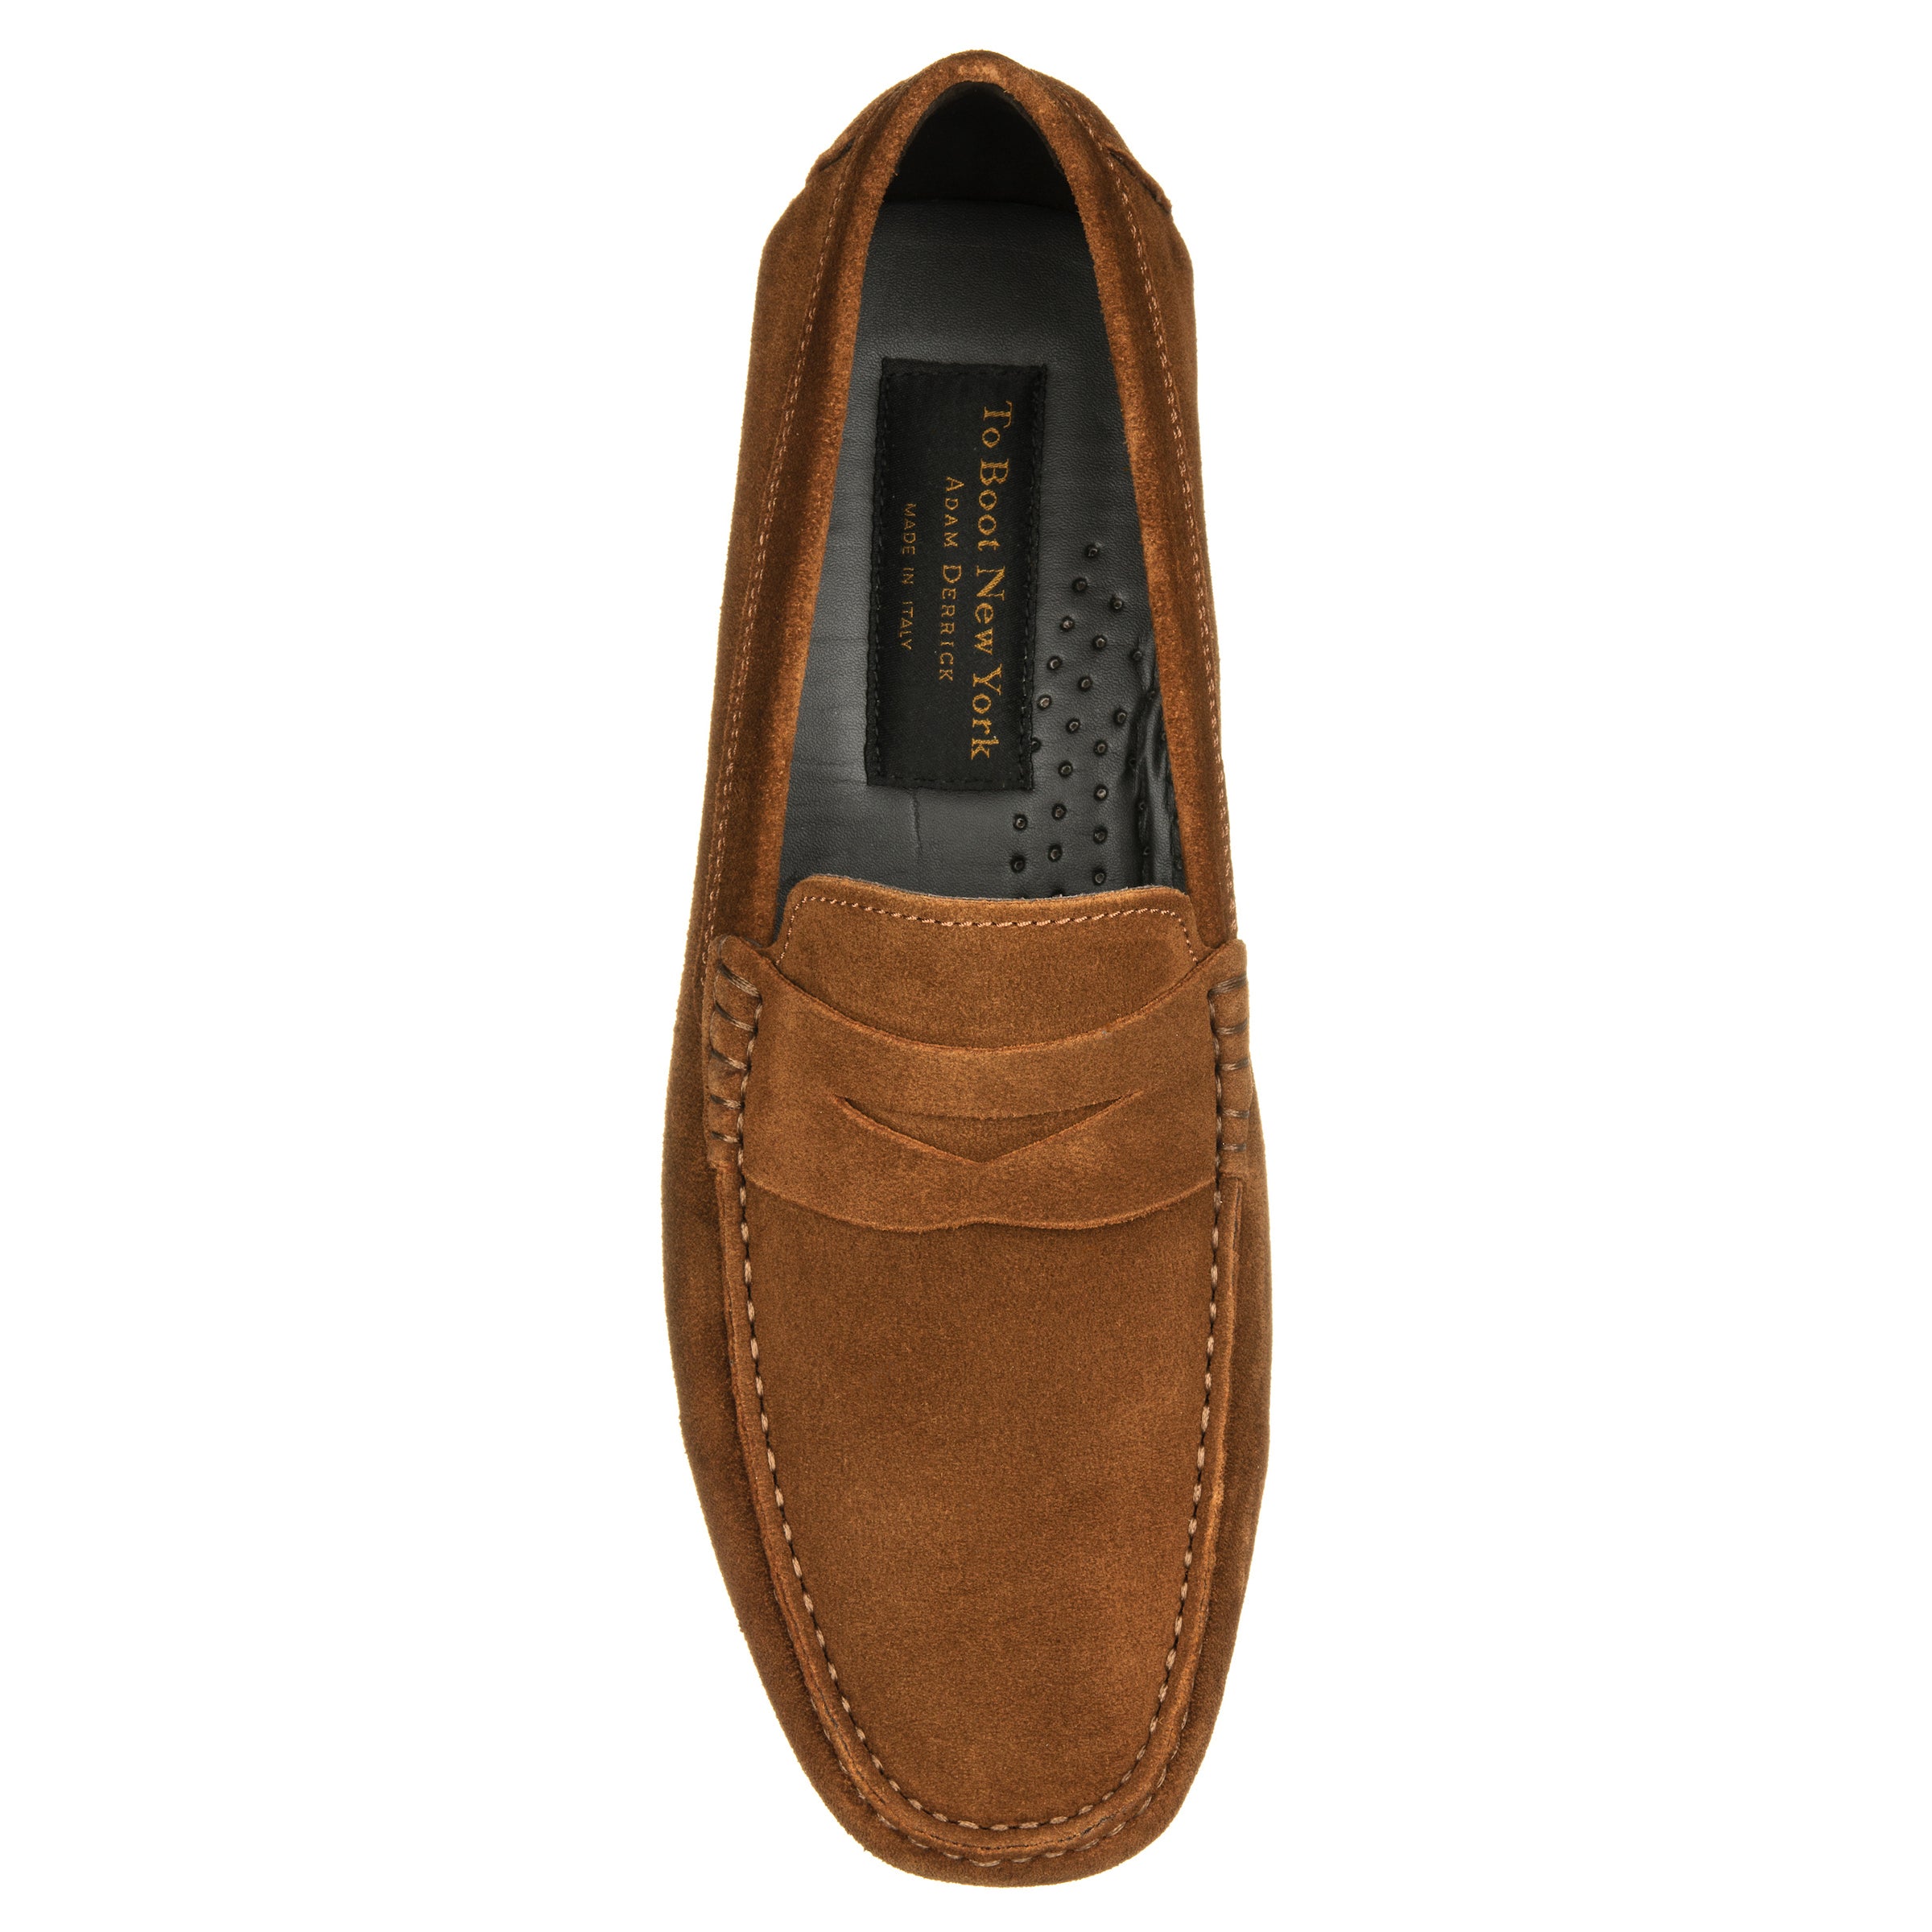 Mitchum Mid-Brown Suede Driving Shoe